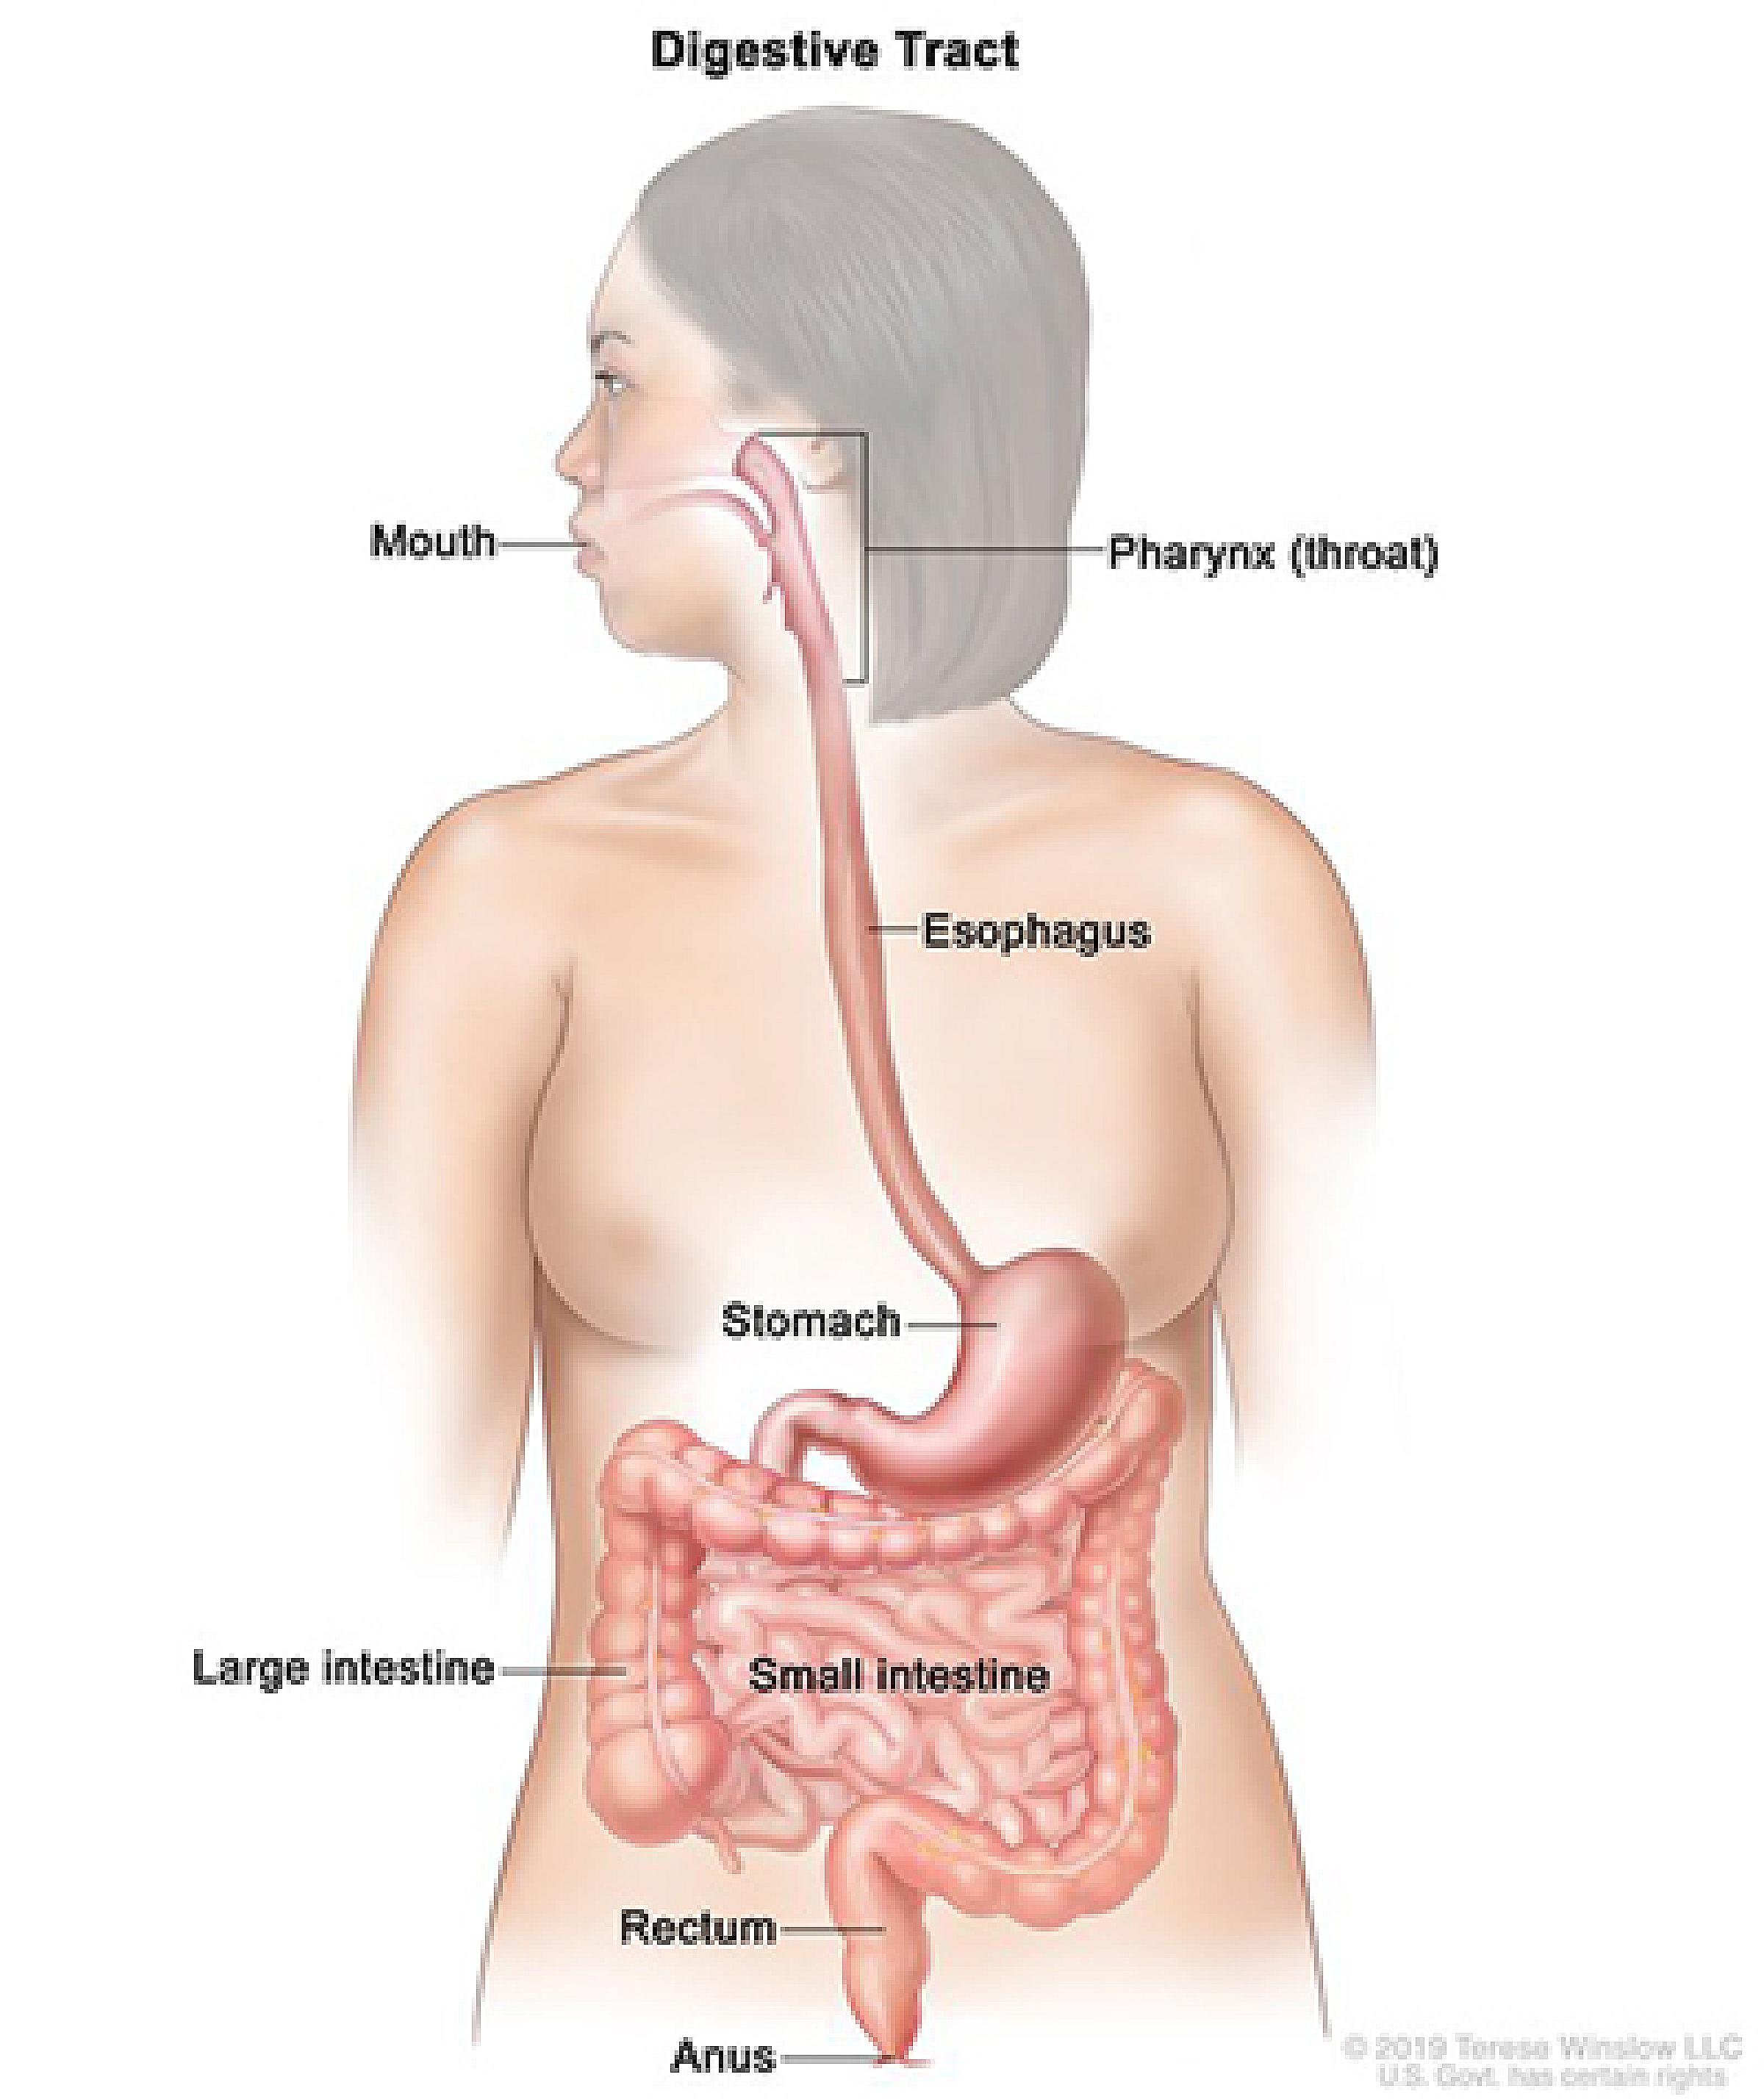 Digestive tract shown in woman outlining the mouth, throat, esophagus, stomach, large intestine, small intestine, rectum, and anus.